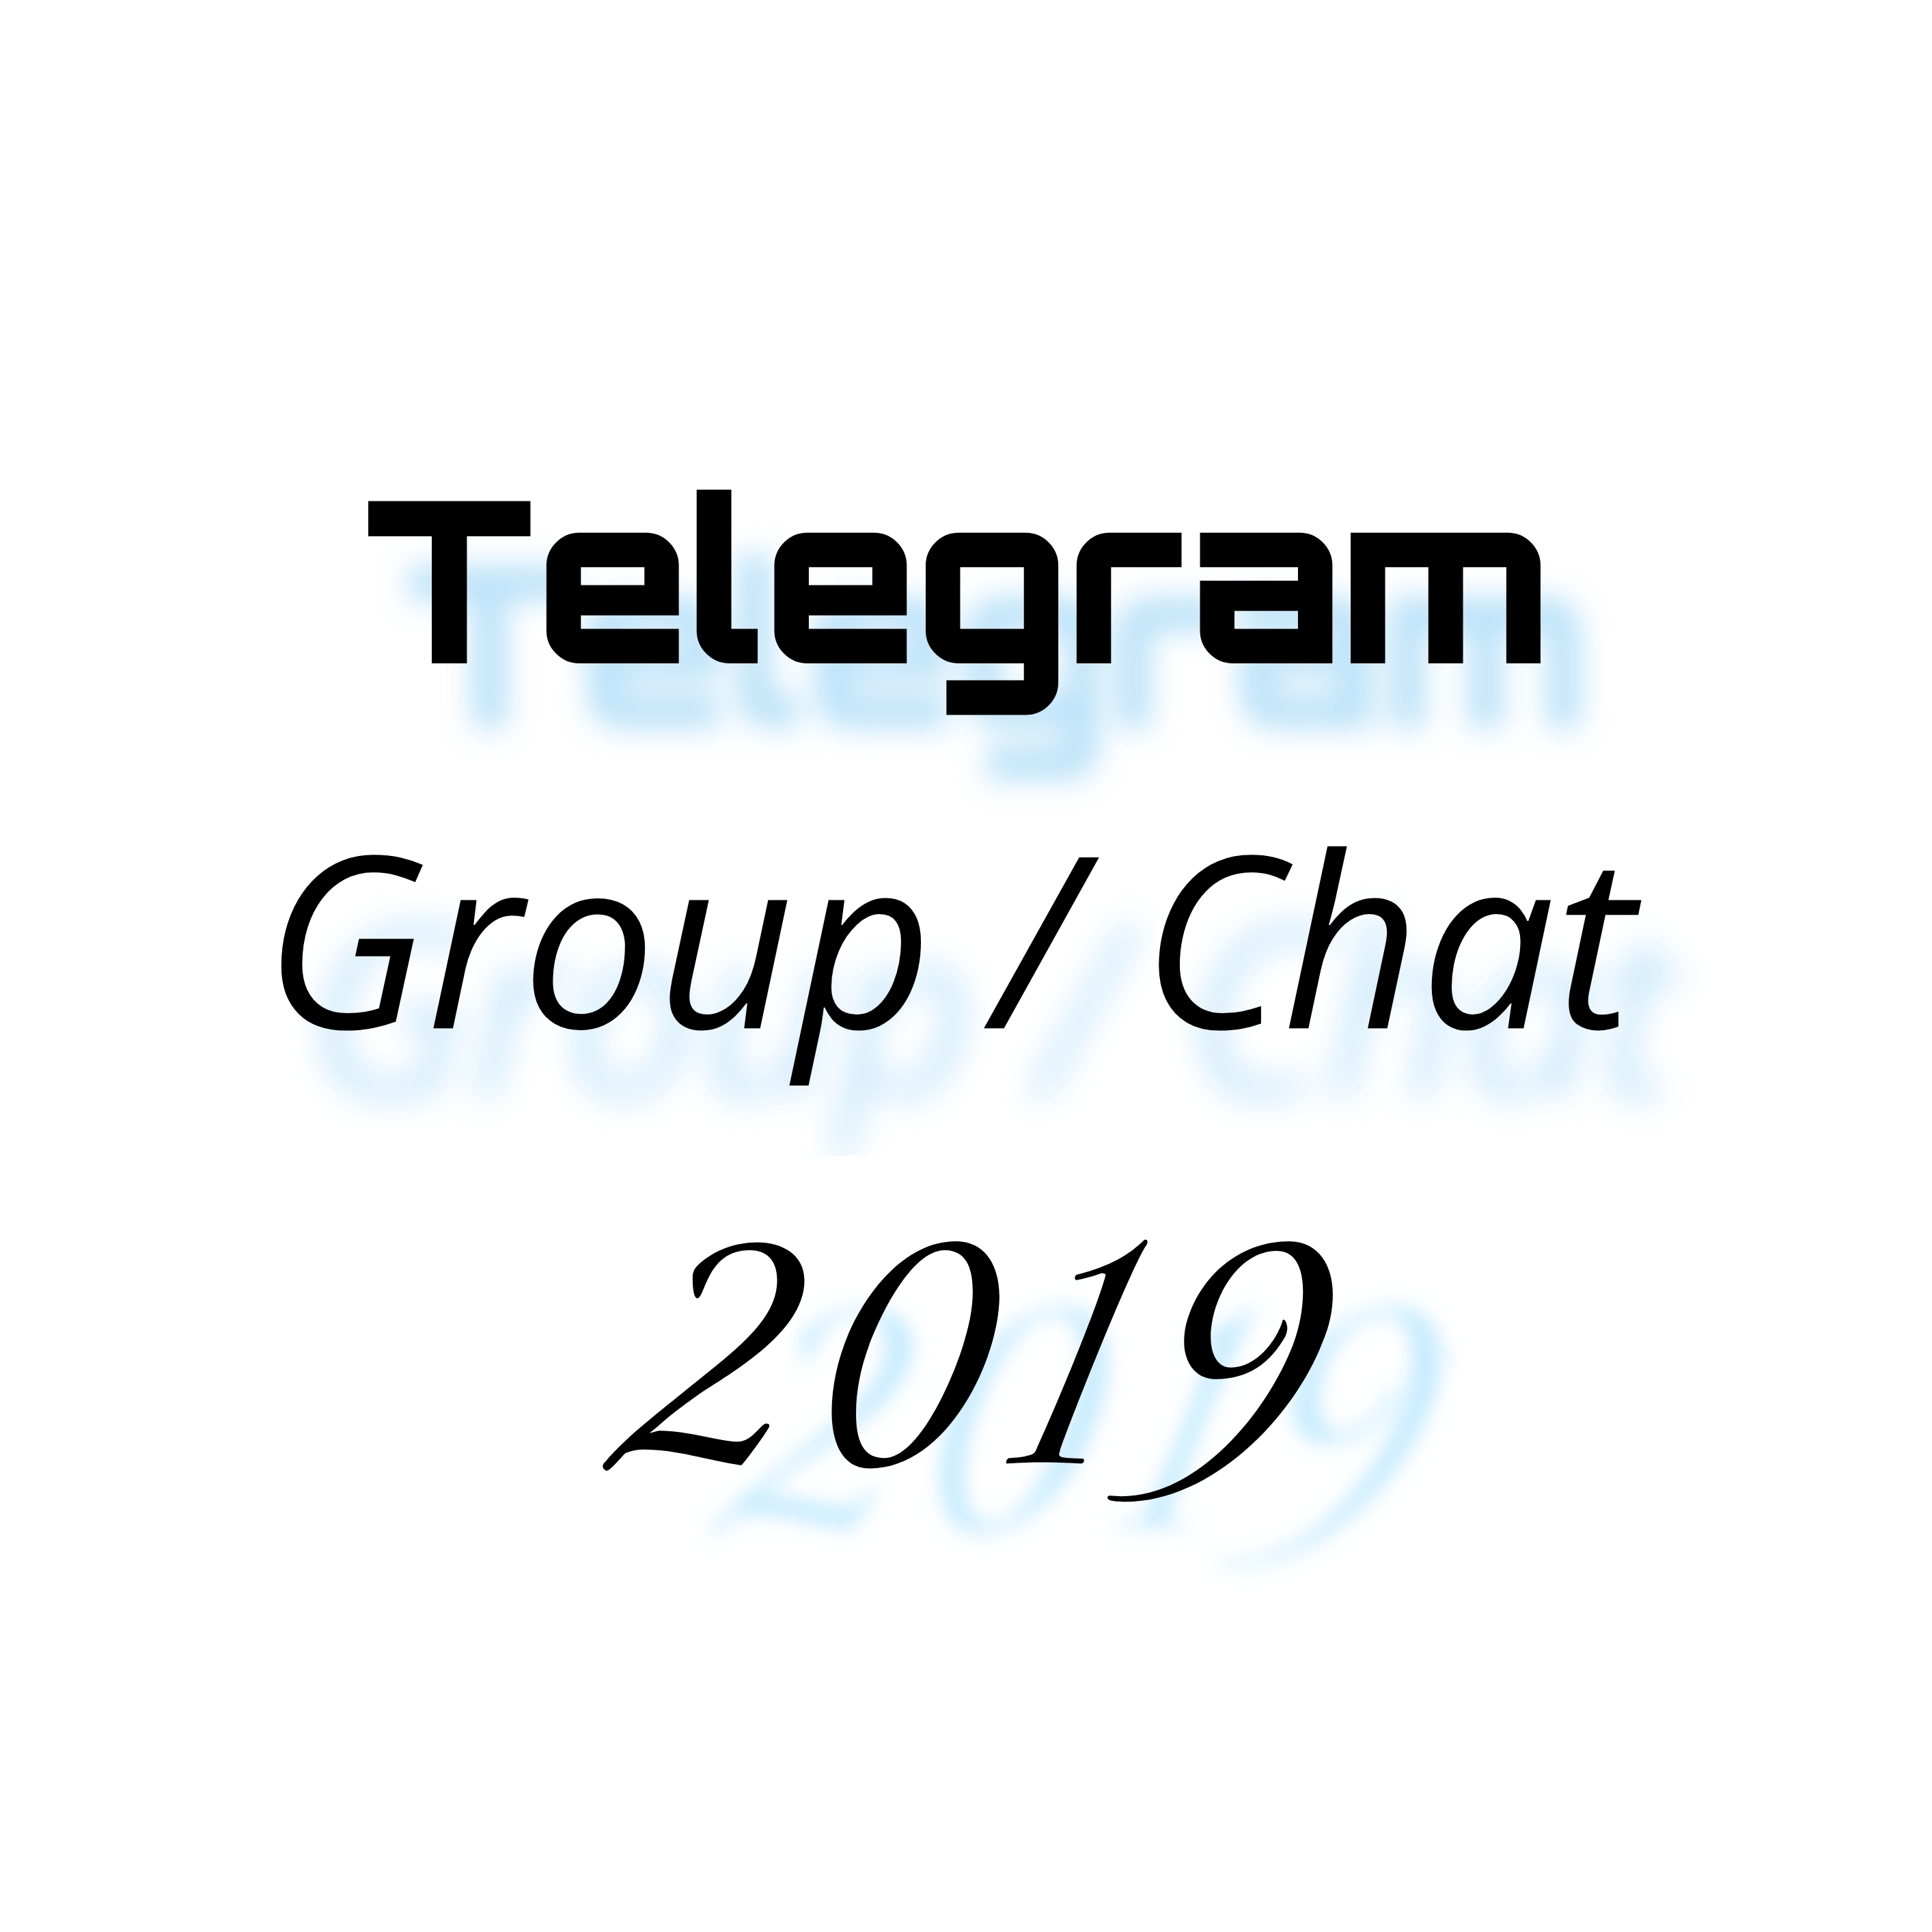 Group / Chat 2019